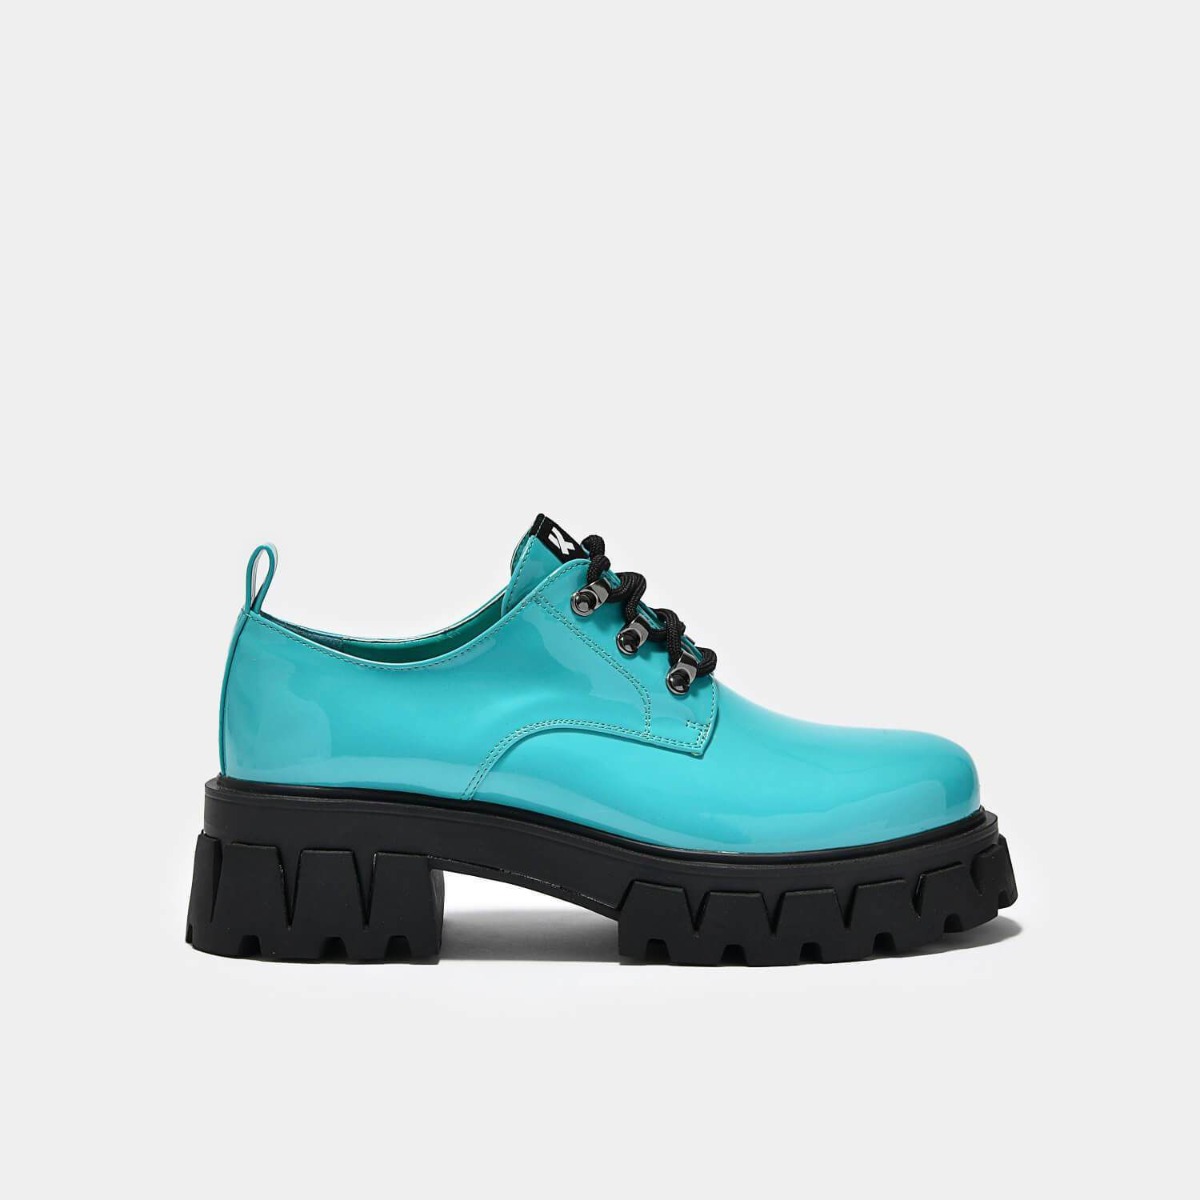 kf382001b_chaussures-gothique-rock-cyber-mensis-turquoise